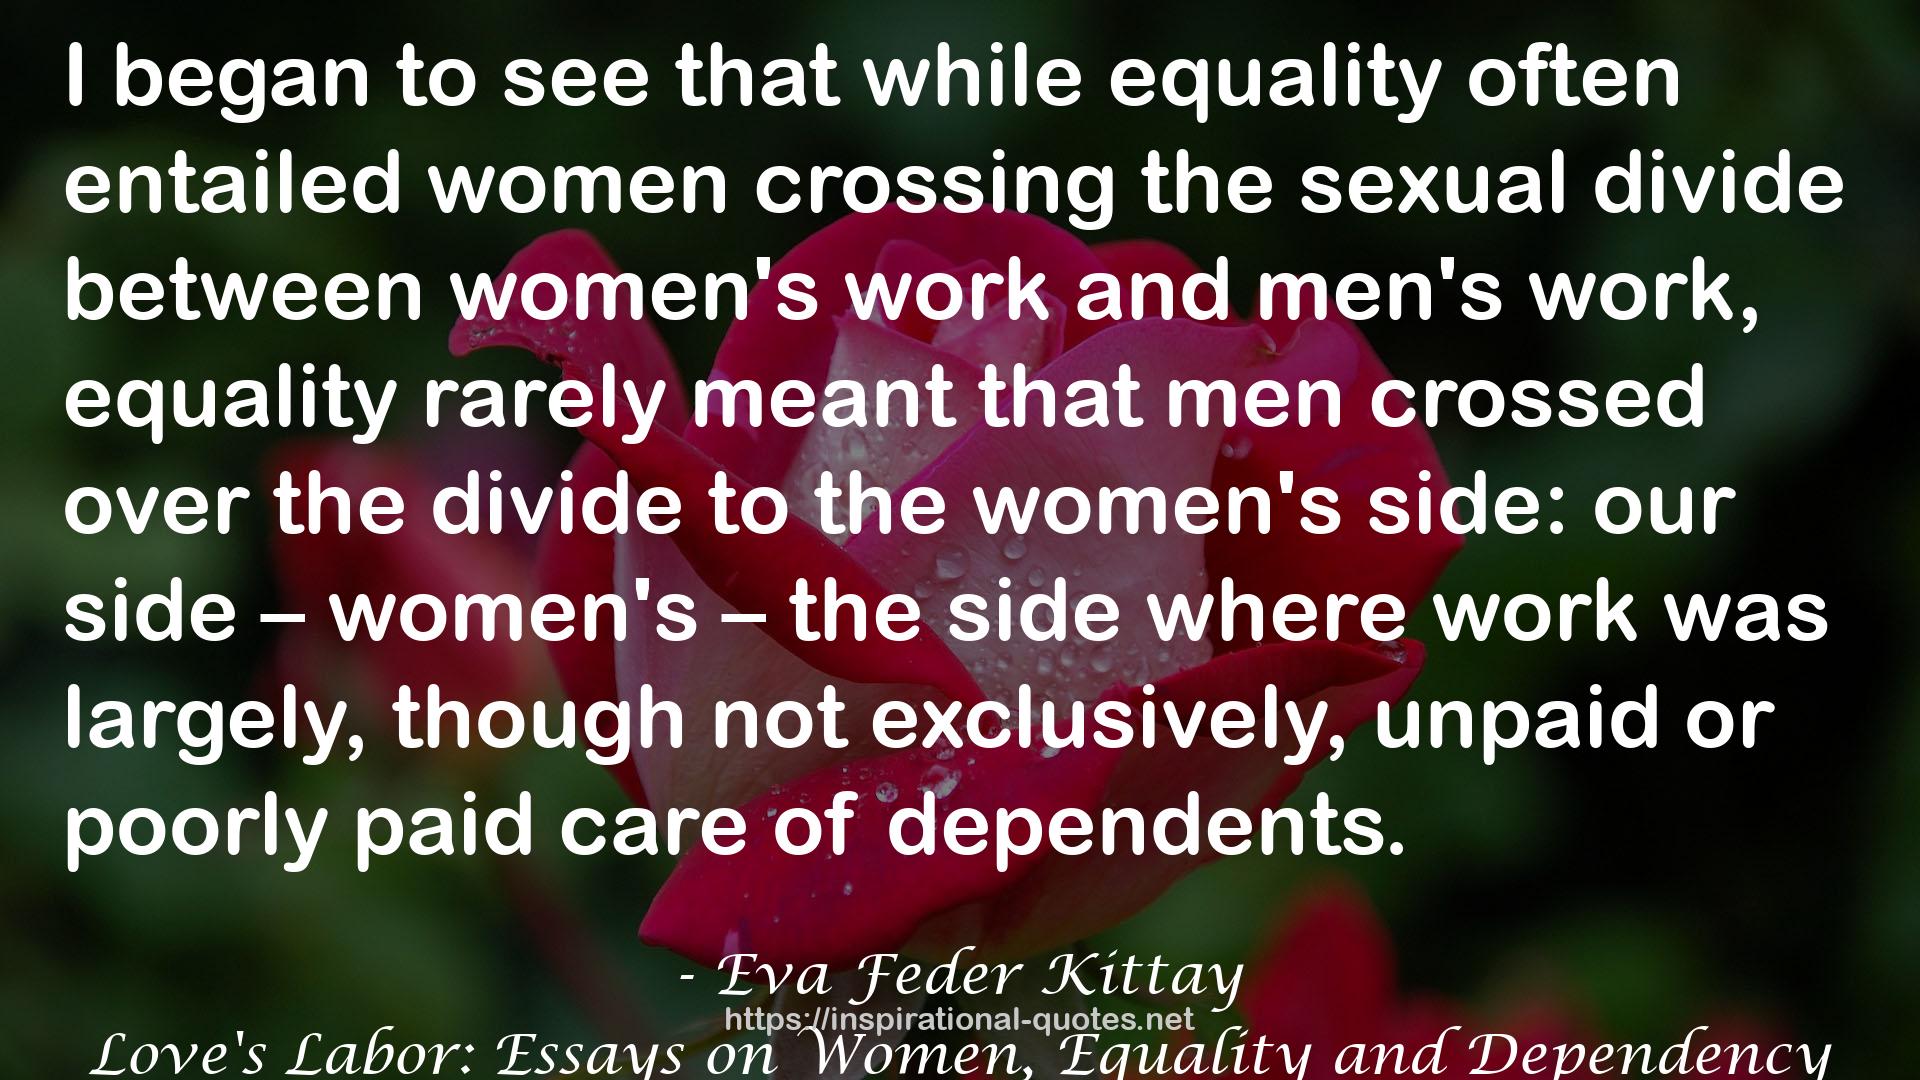 Love's Labor: Essays on Women, Equality and Dependency QUOTES